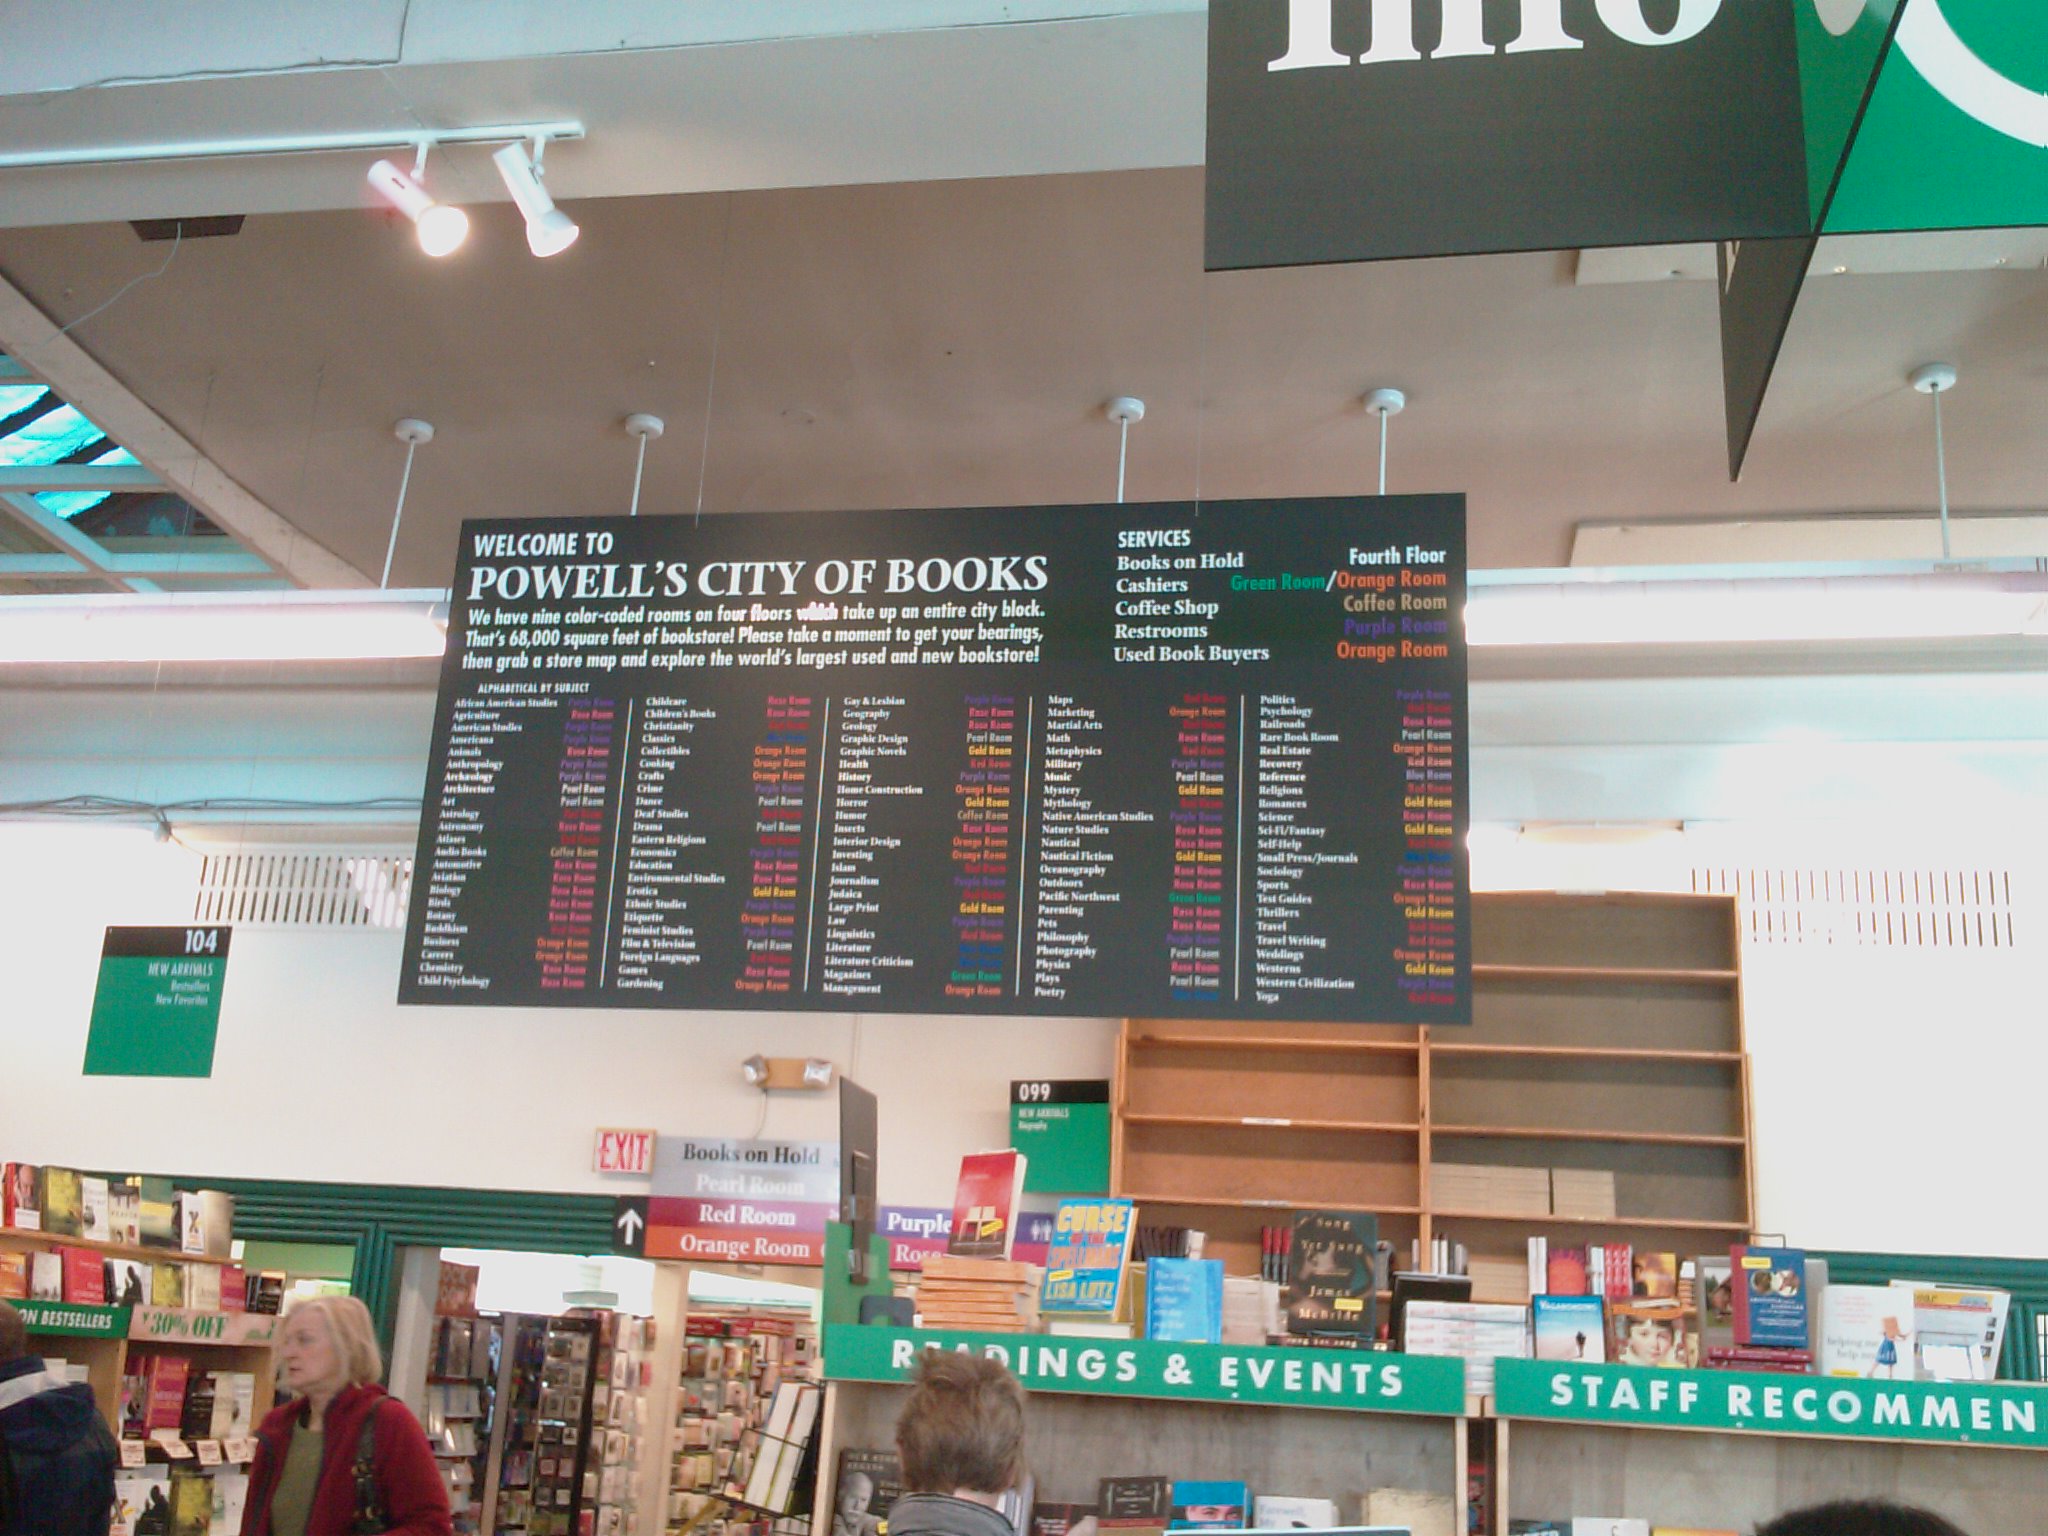 The directory at Powells